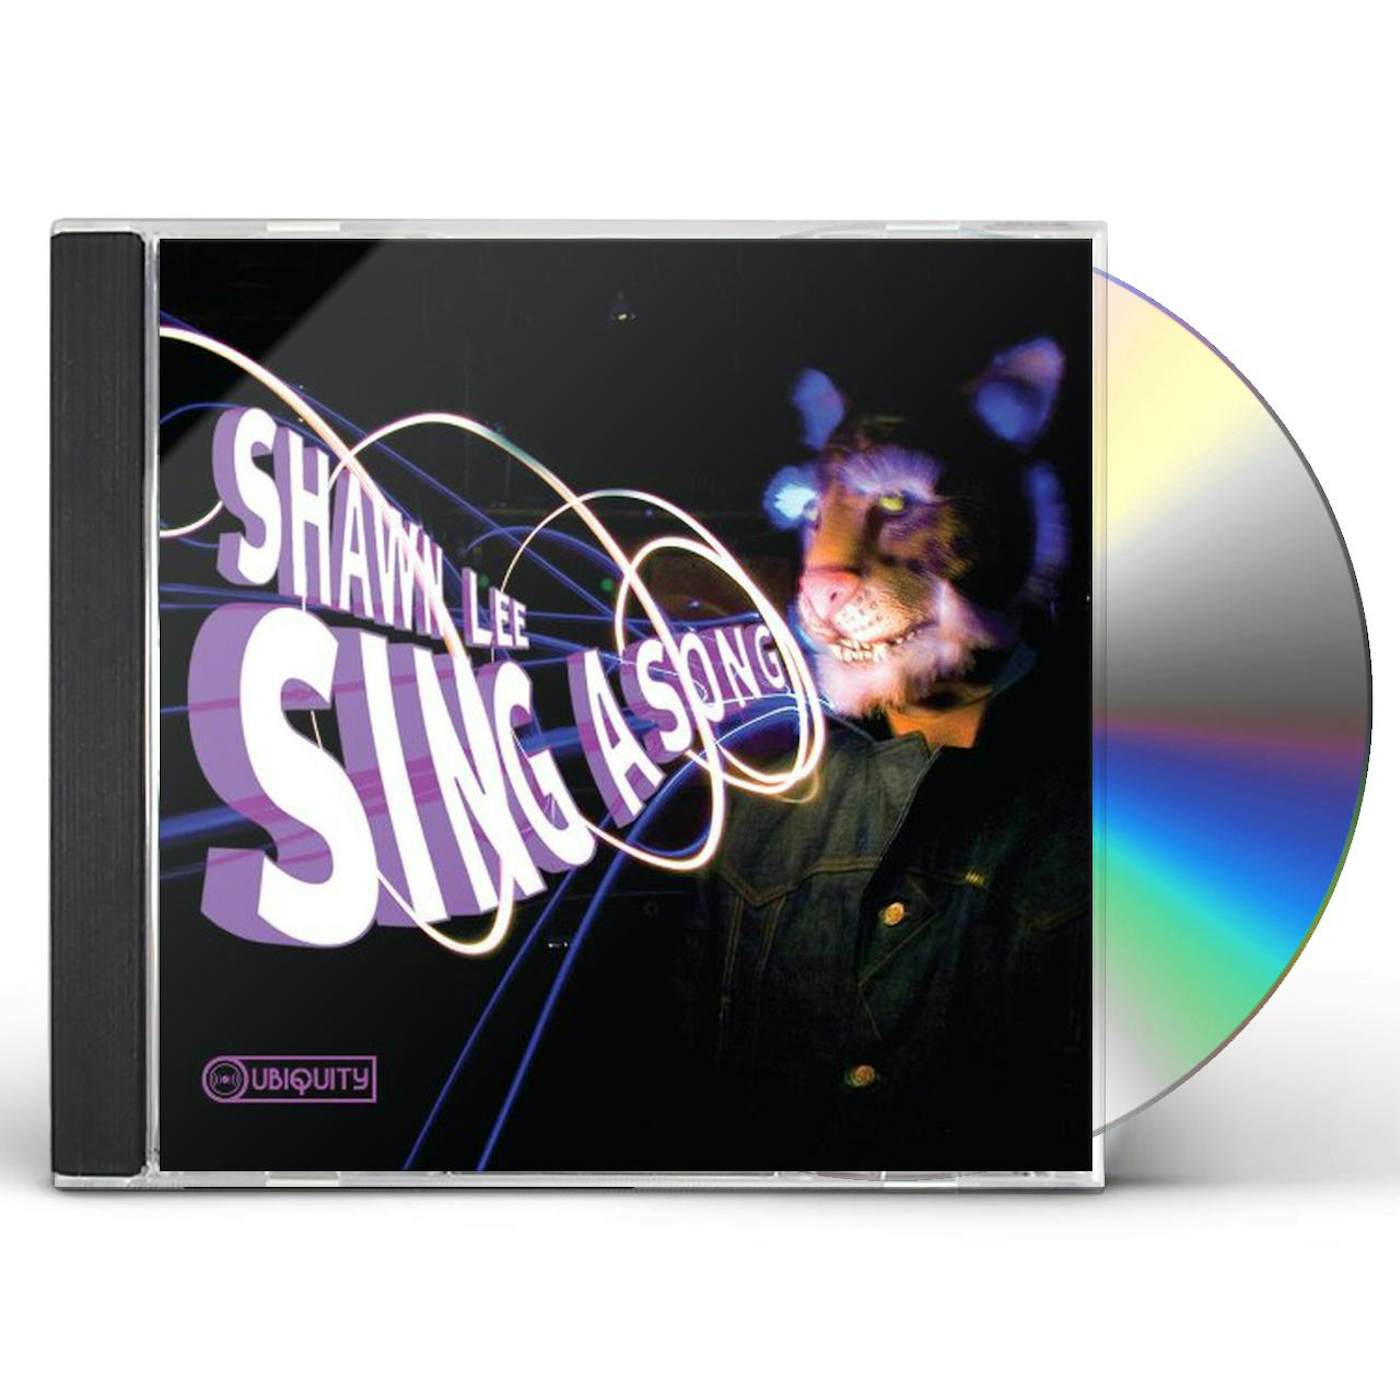 Shawn Lee SING A SONG CD